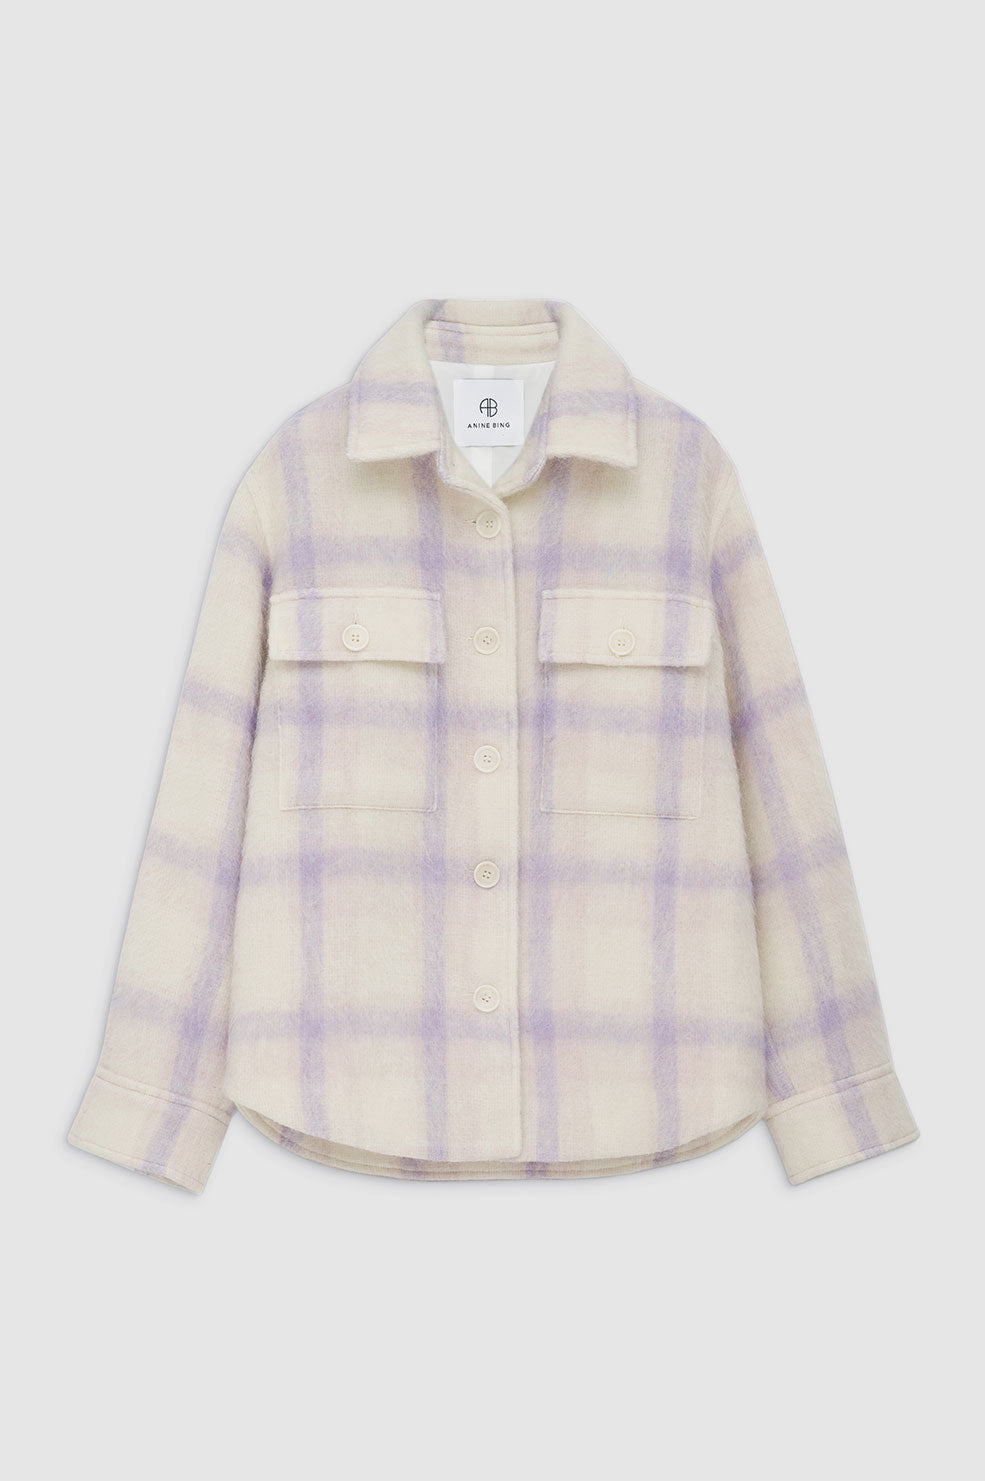 ANINE BING Phoebe Jacket- Lavender And Cream Check